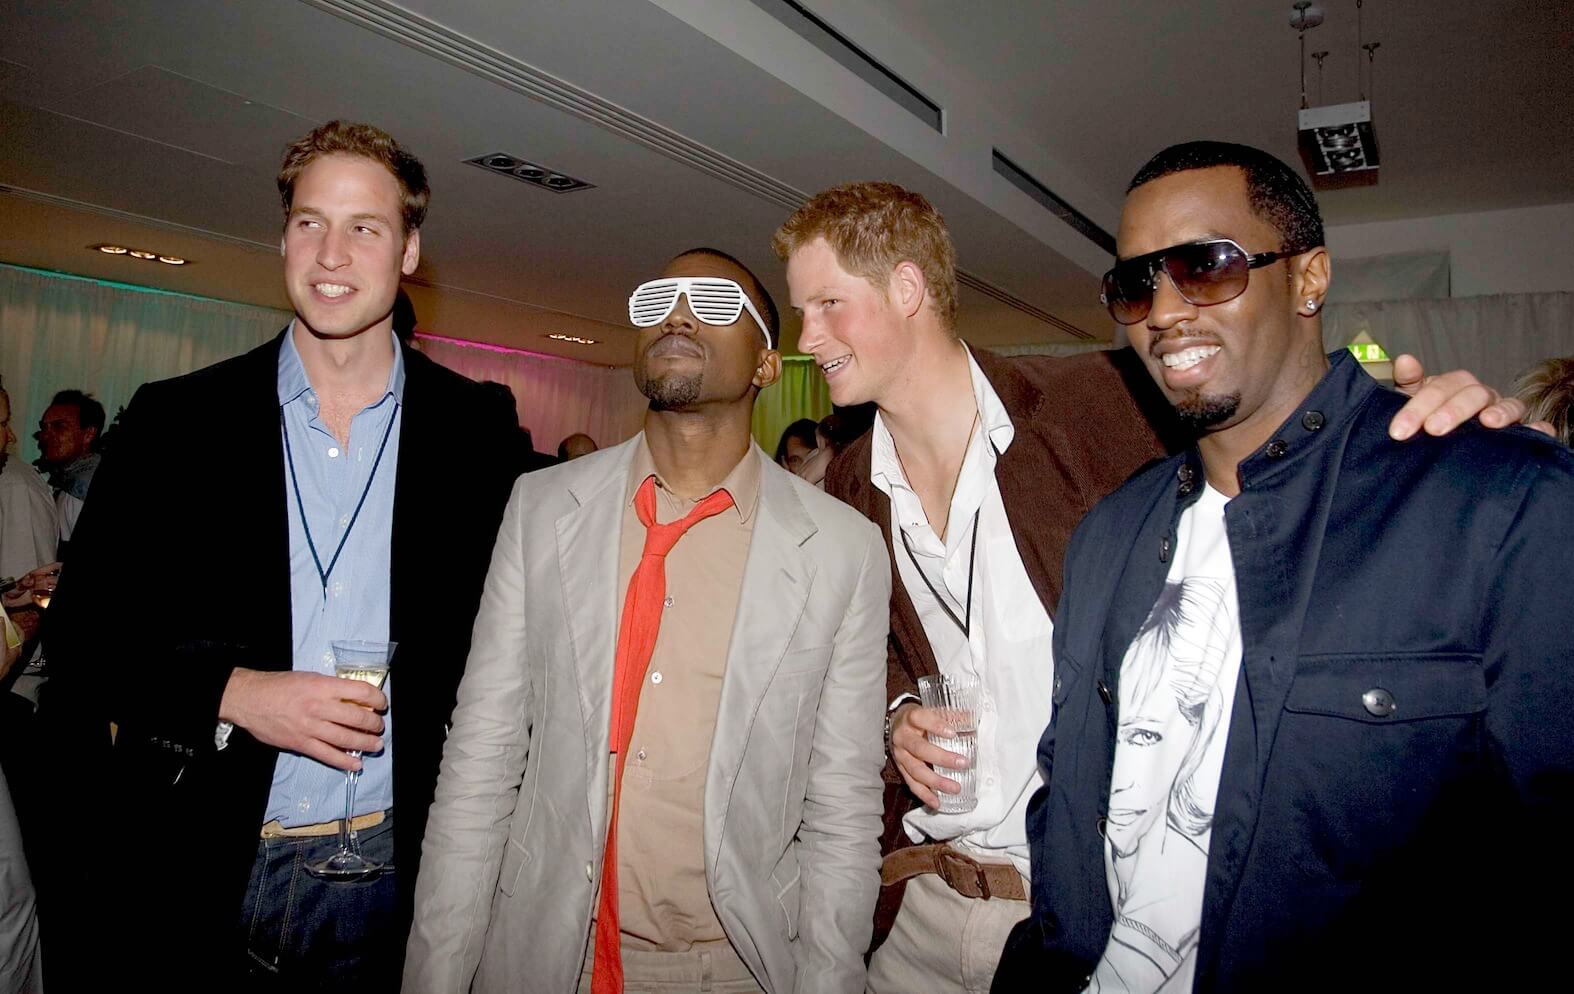 Prince William, Kanye West, Prince Harry, and Sean 'P. Diddy' Combs laughing together in 2007